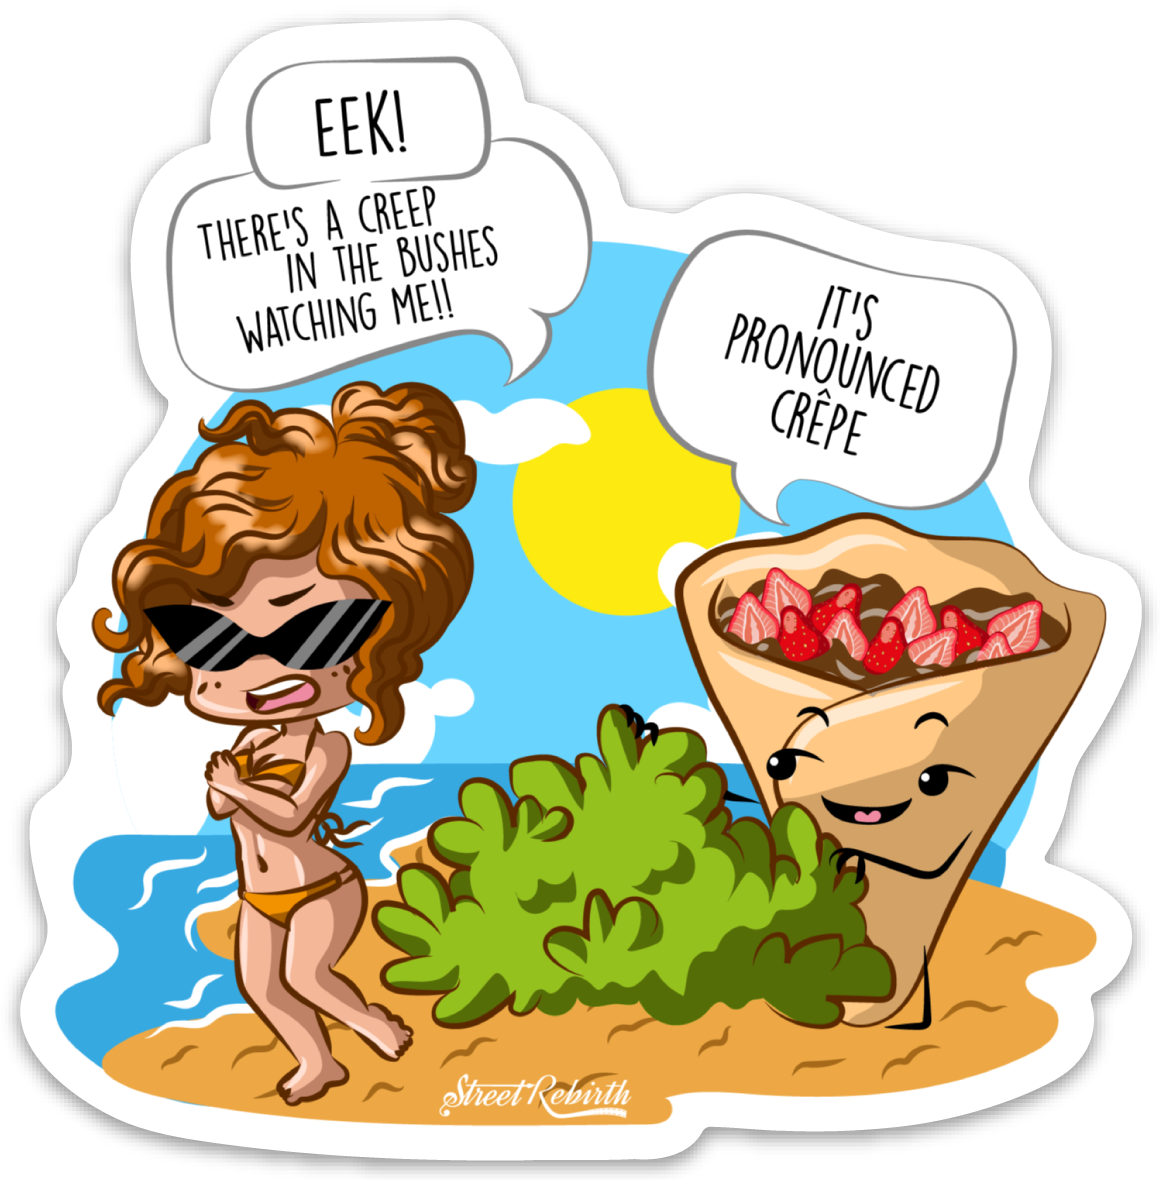 Eek! There's a Crepe In the Bushes Watching Me!! PUN STICKER – ONE 4 INCH WATER PROOF VINYL STICKER – FOR HYDRO FLASK, SKATEBOARD, LAPTOP, PLANNER, CAR, COLLECTING, GIFTING